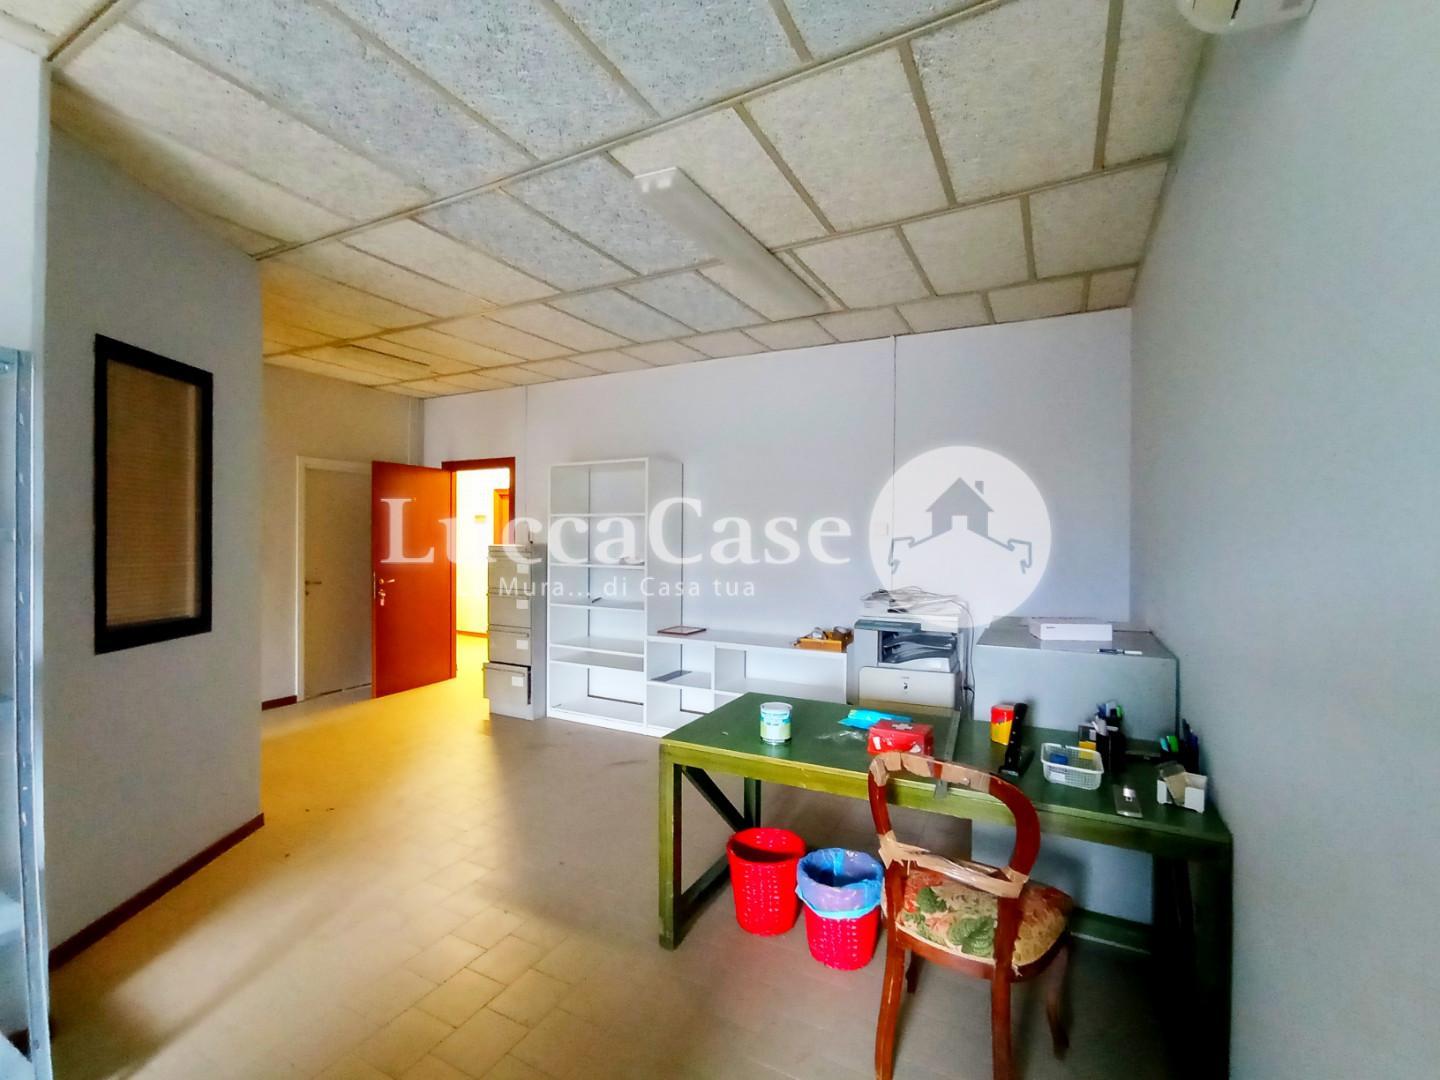 Office for commercial rentals in Capannori (LU)